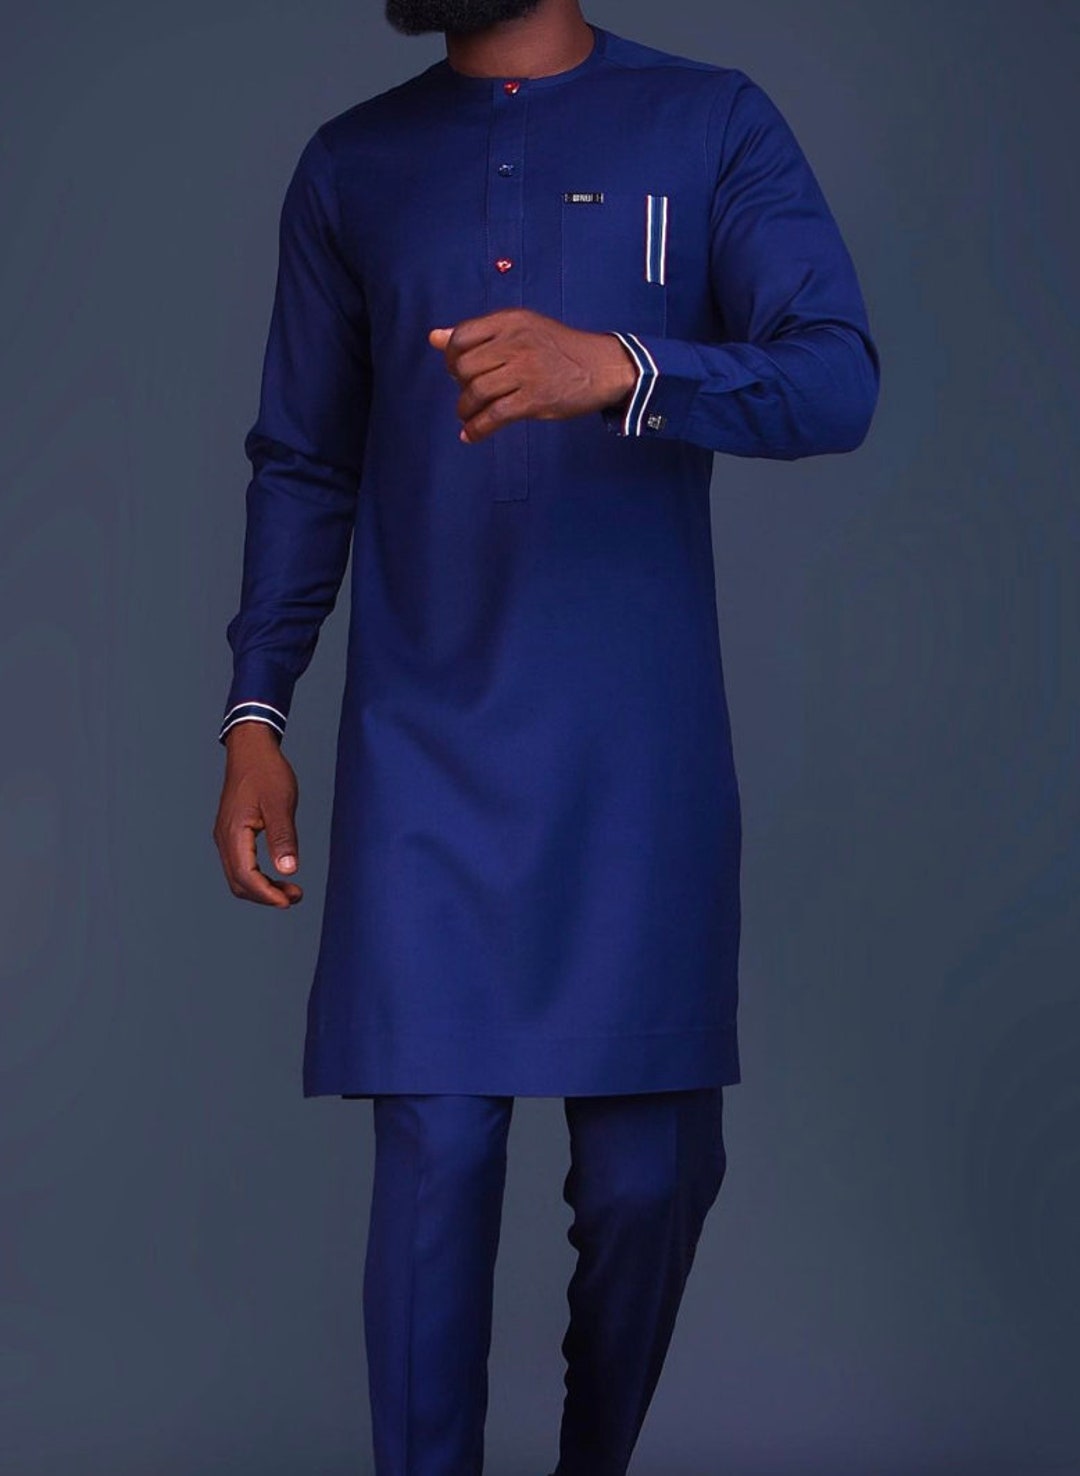 Blue African Men's Clothing,african Men Outfit,african Men's Suit ...